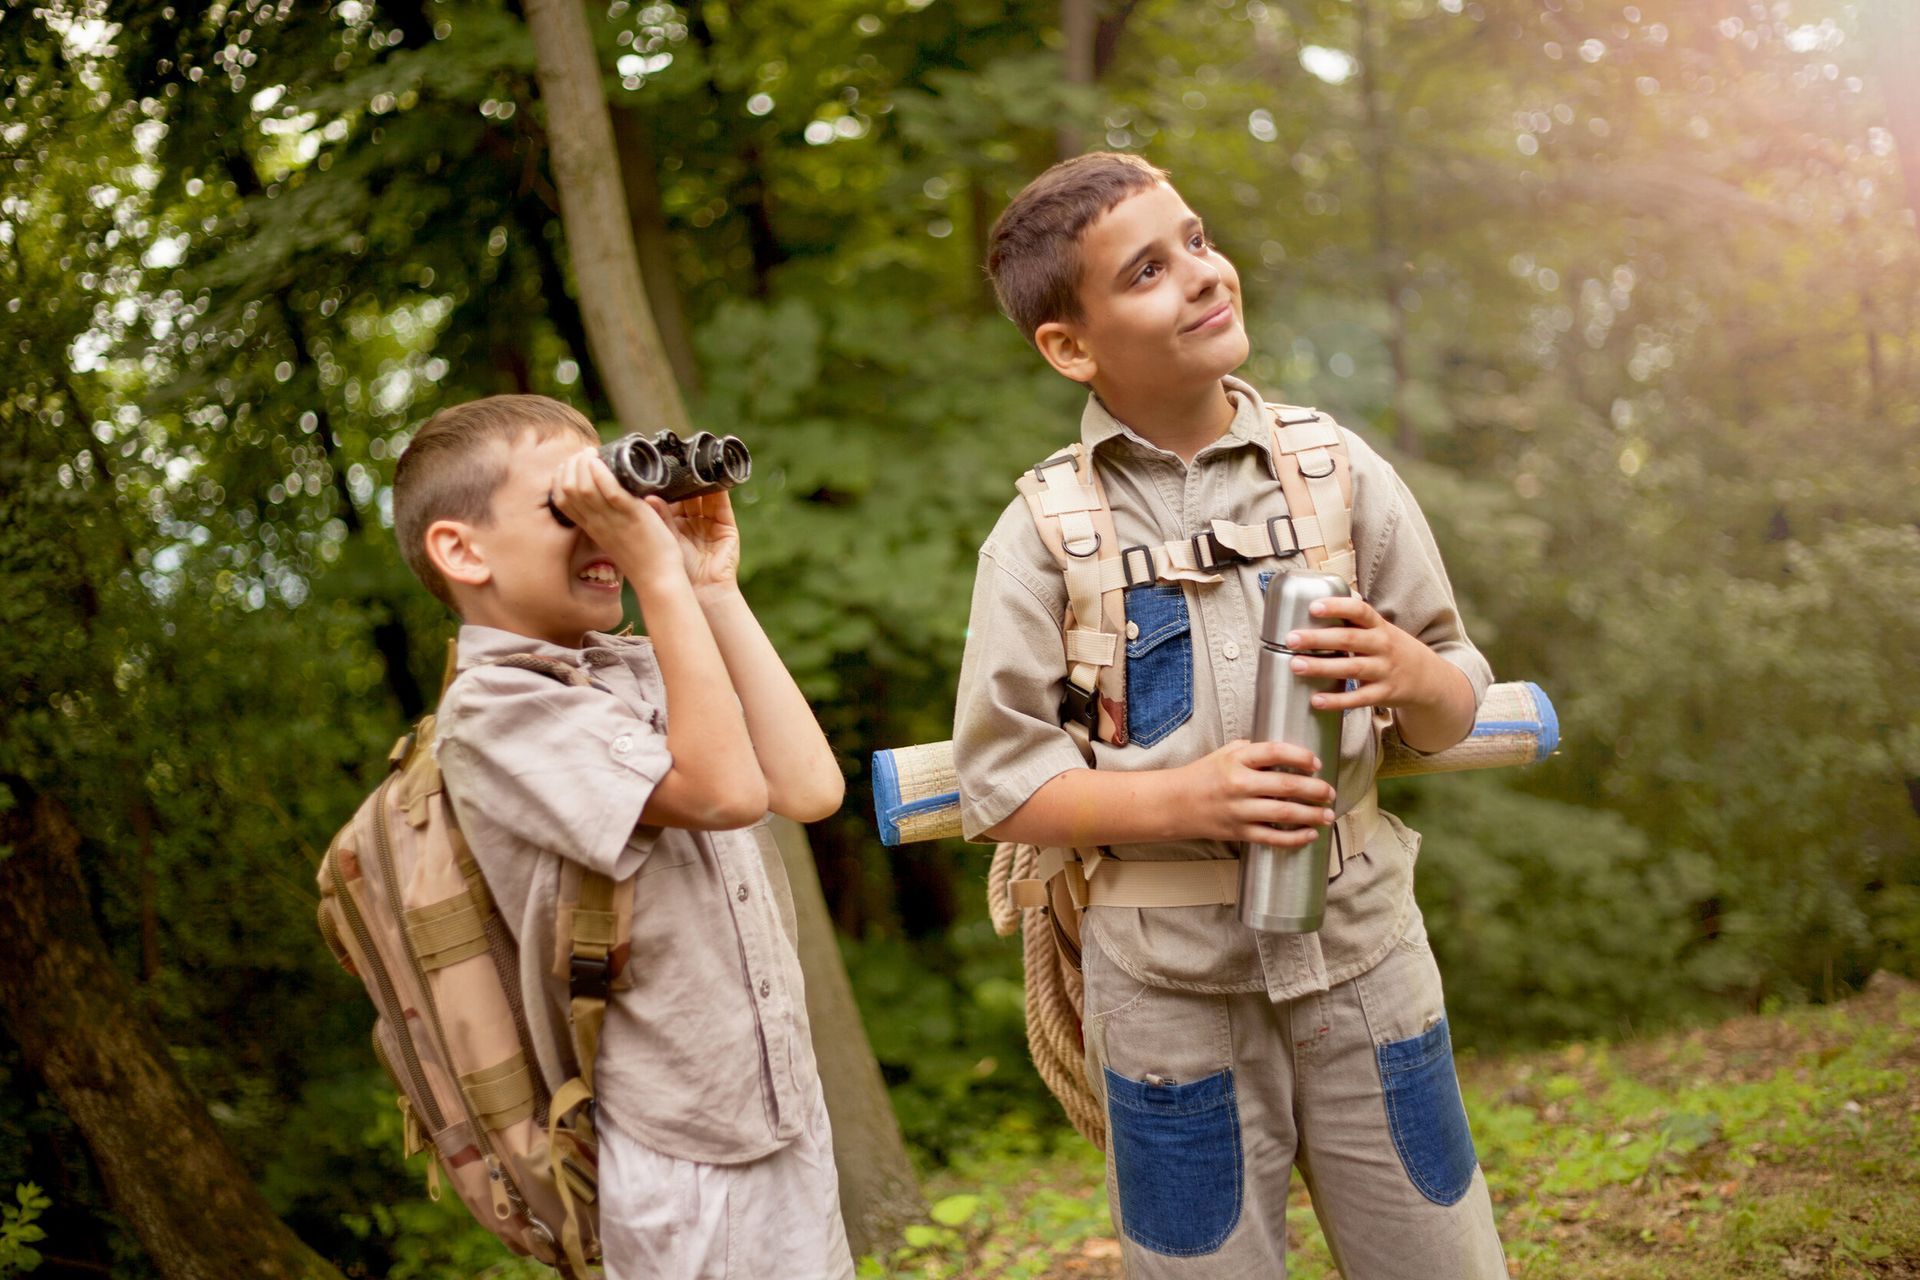 Two young boys are looking through binoculars in the woods.